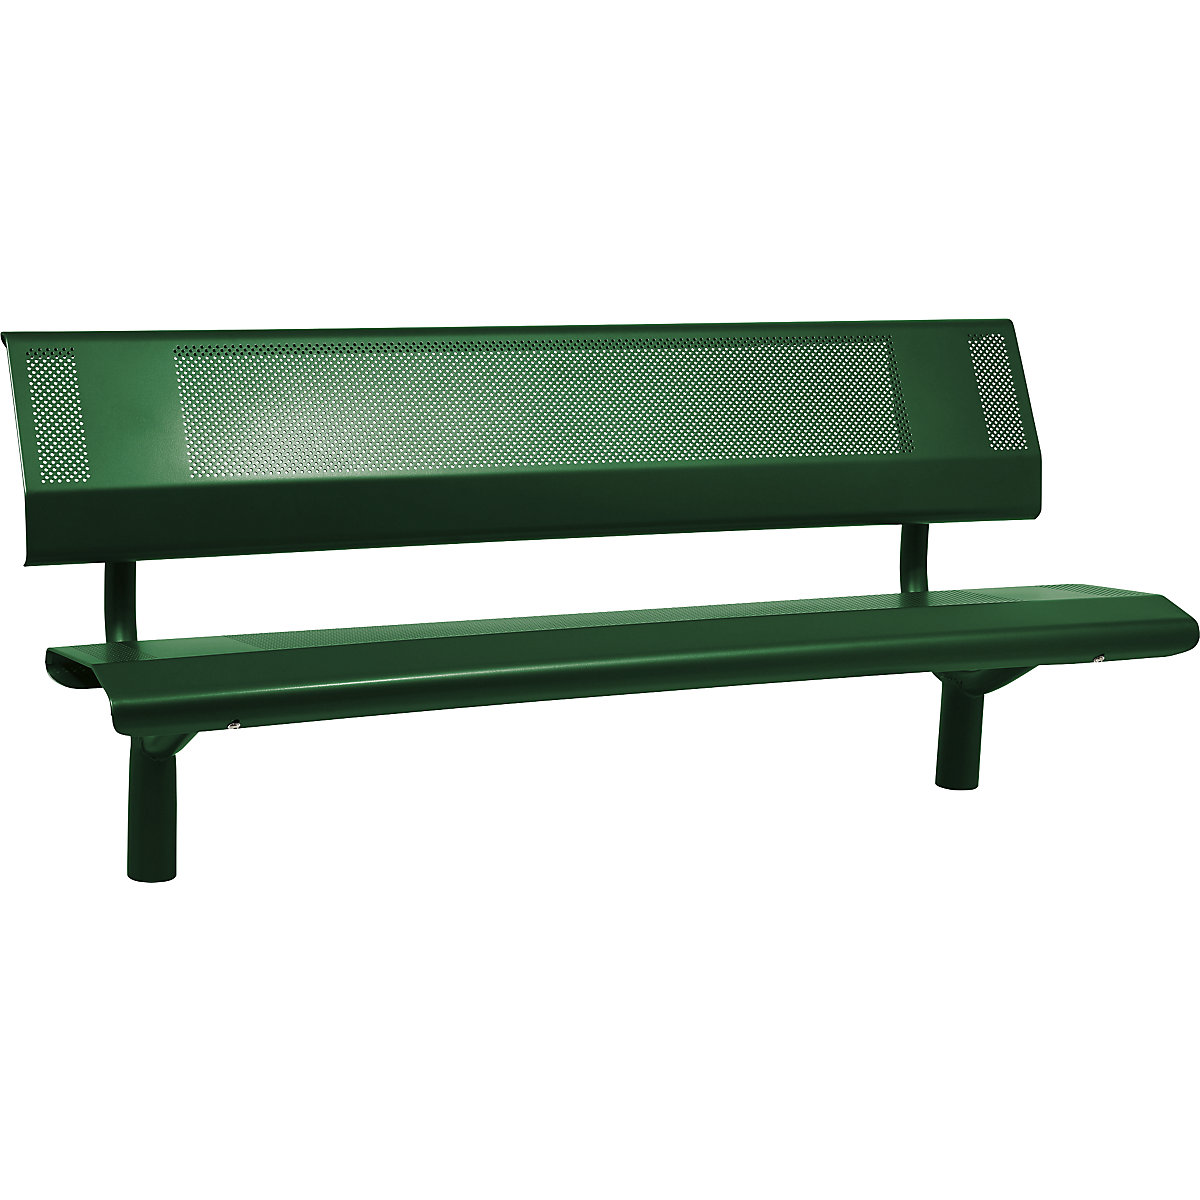 OSLO bench made of steel – PROCITY, seat height 450 mm, length 1800 mm, moss green, with back rest-4